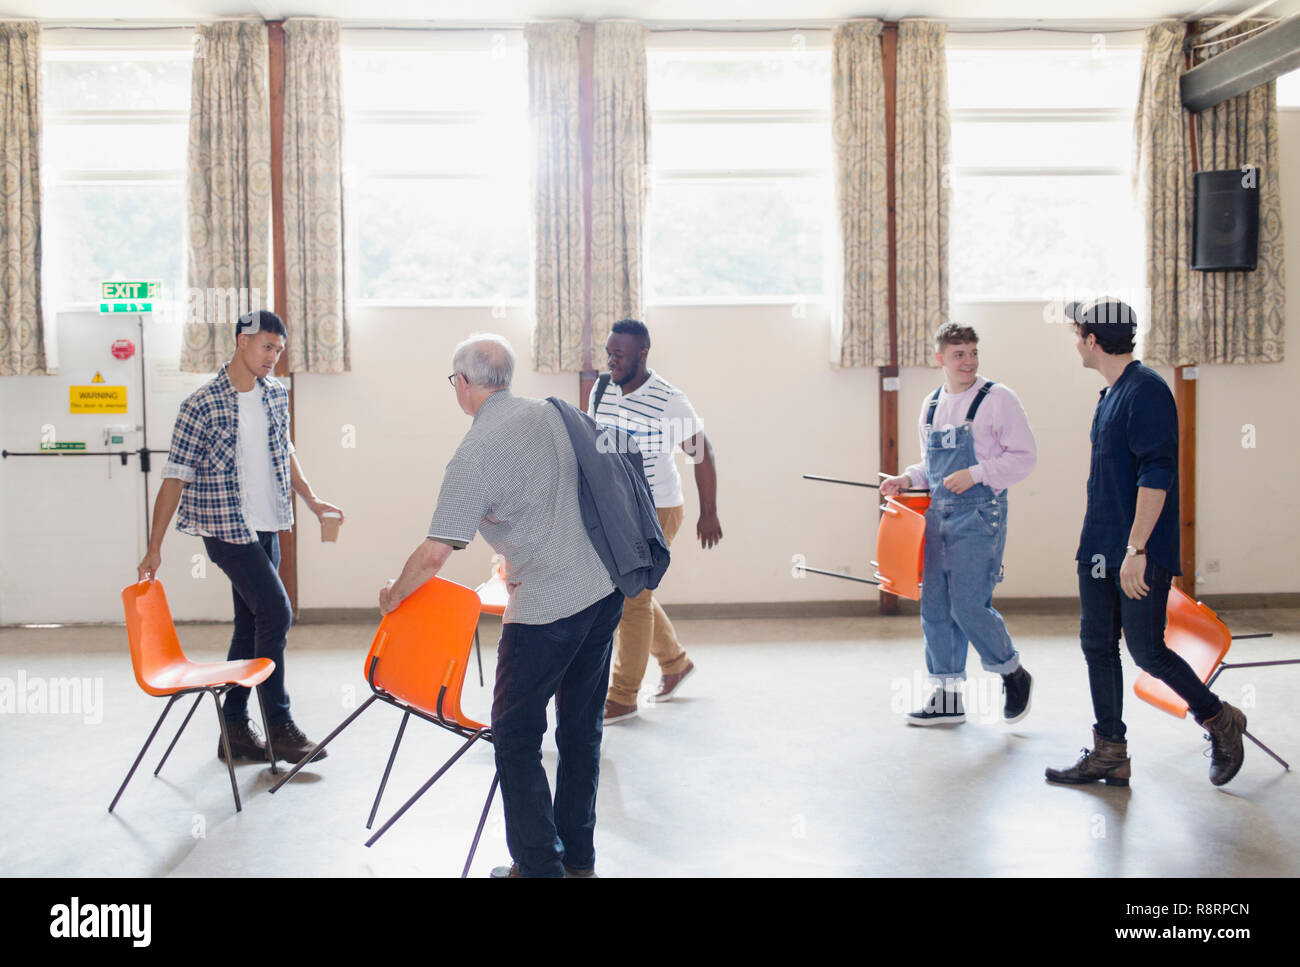 Men arranging chairs for group therapy in community center Stock Photo